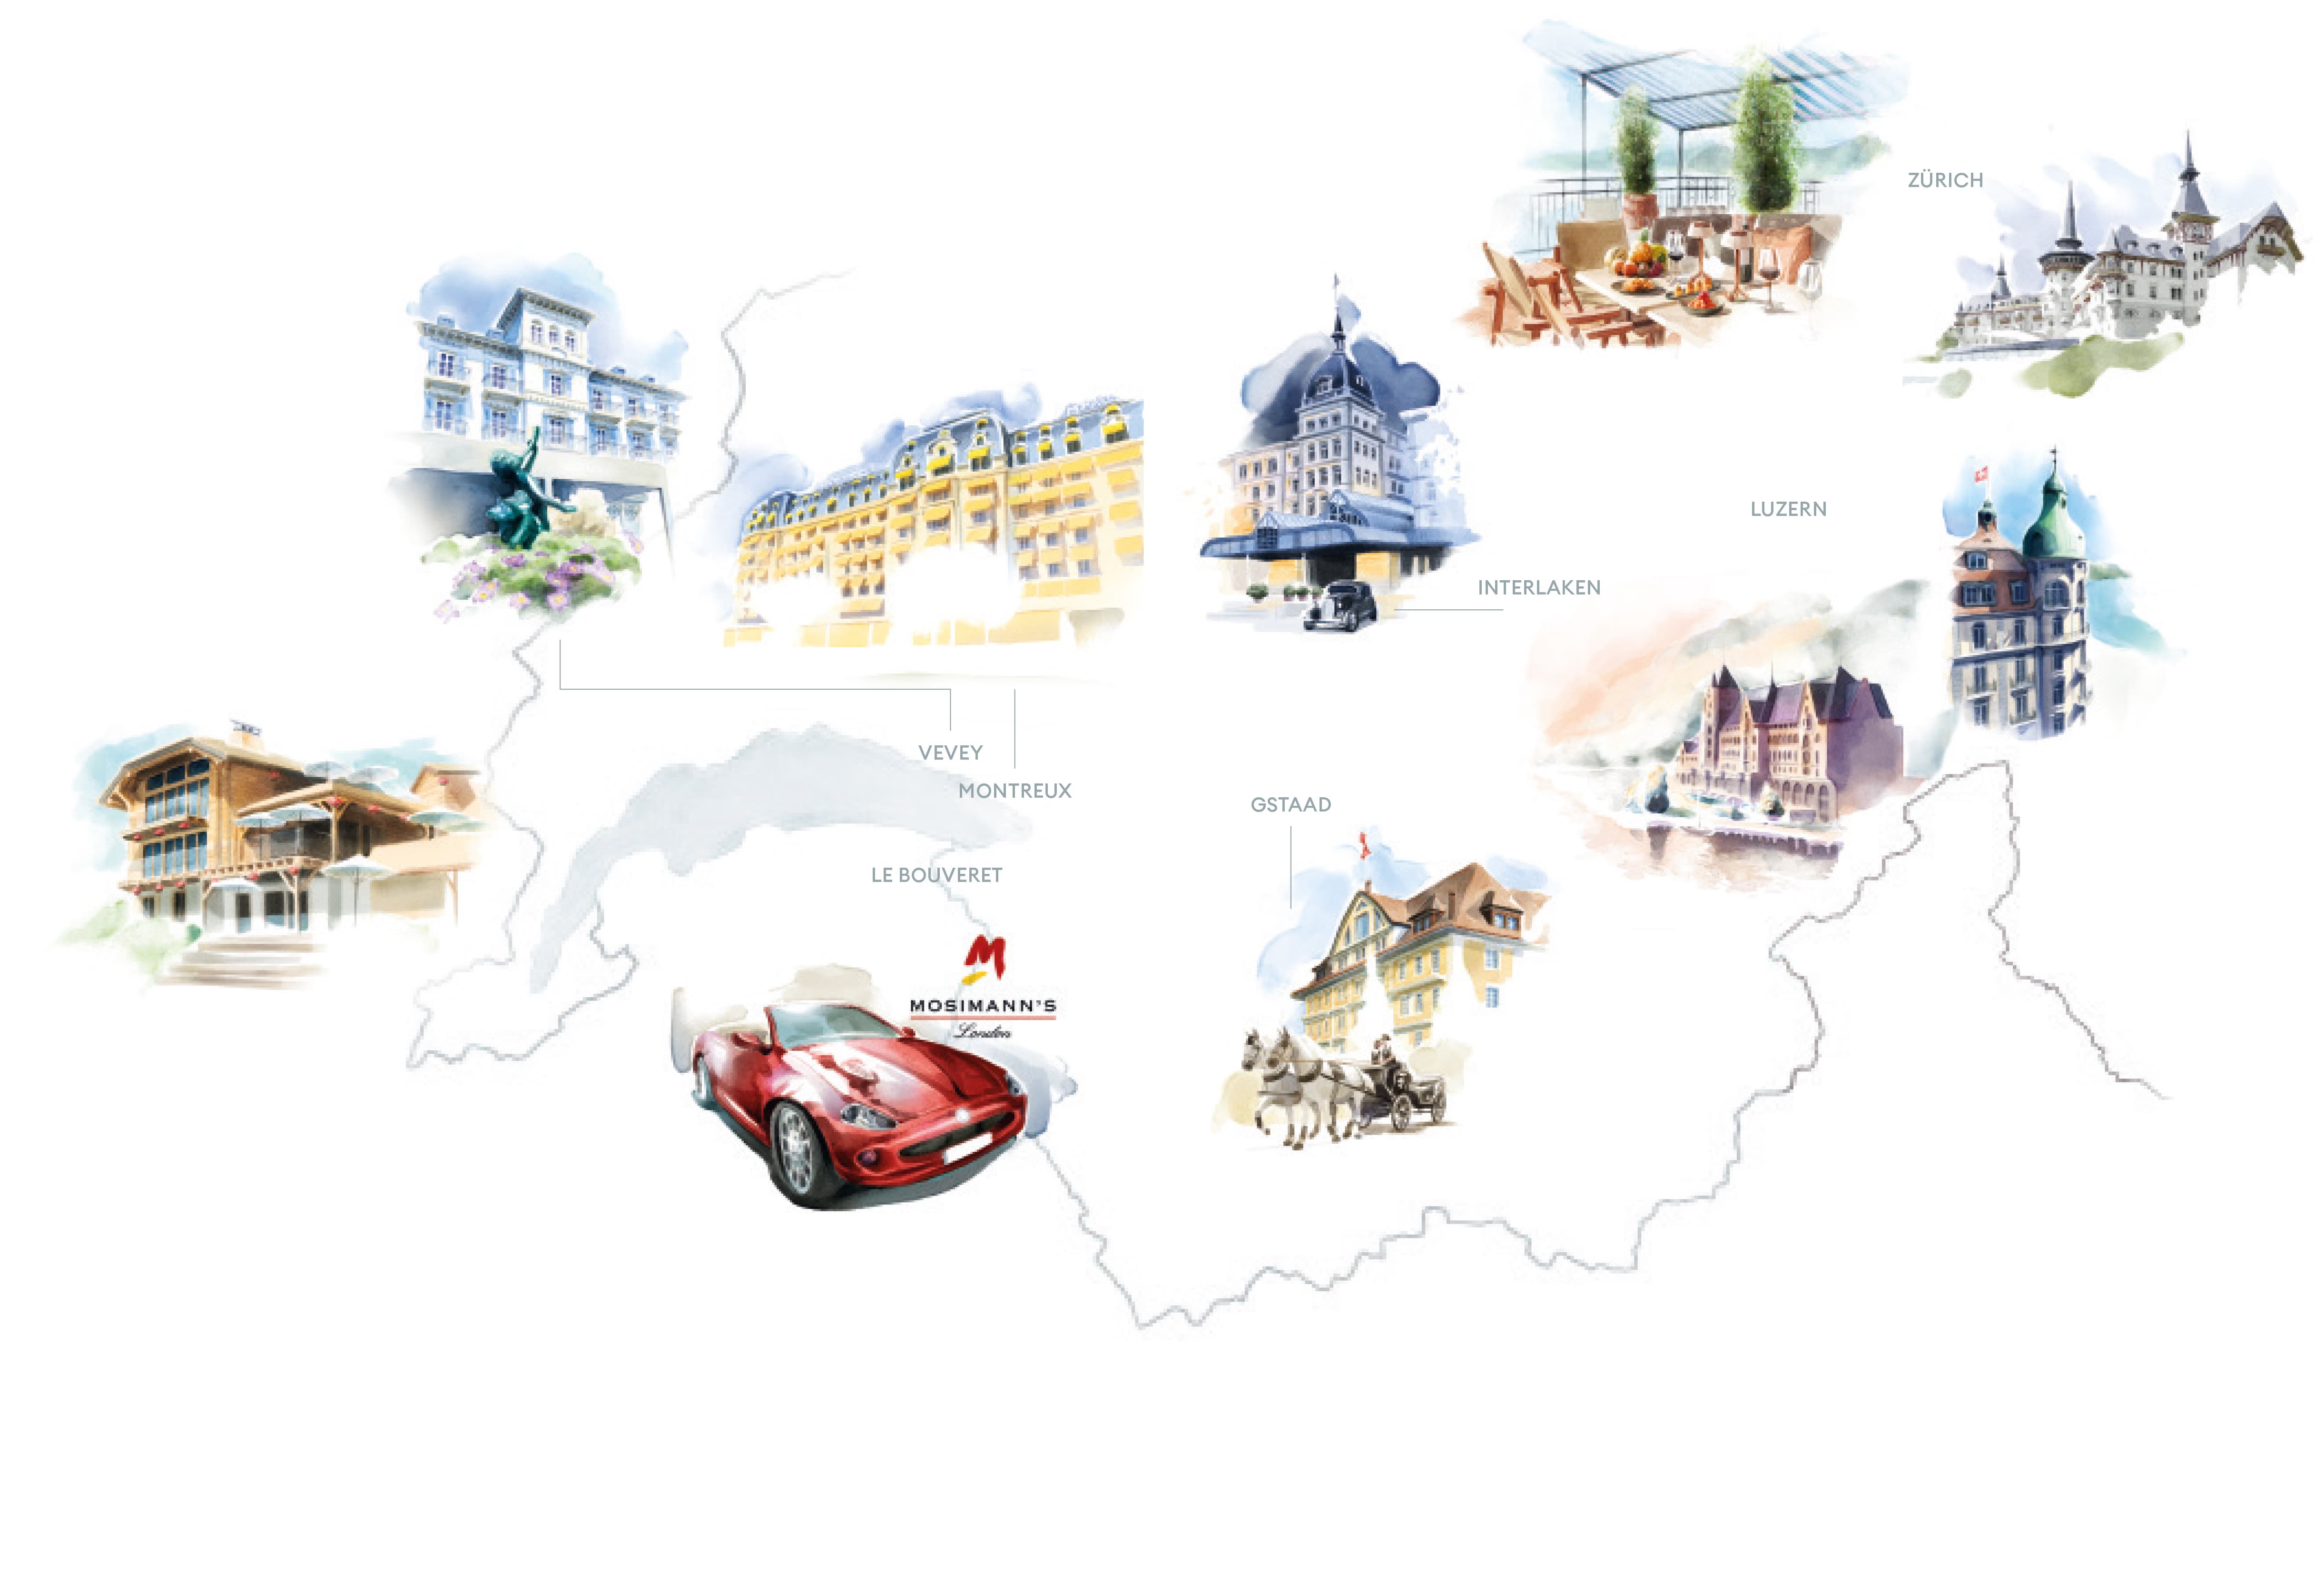 Swiss Deluxe Hotels Travel Guide On The Road With Anton Mosimann